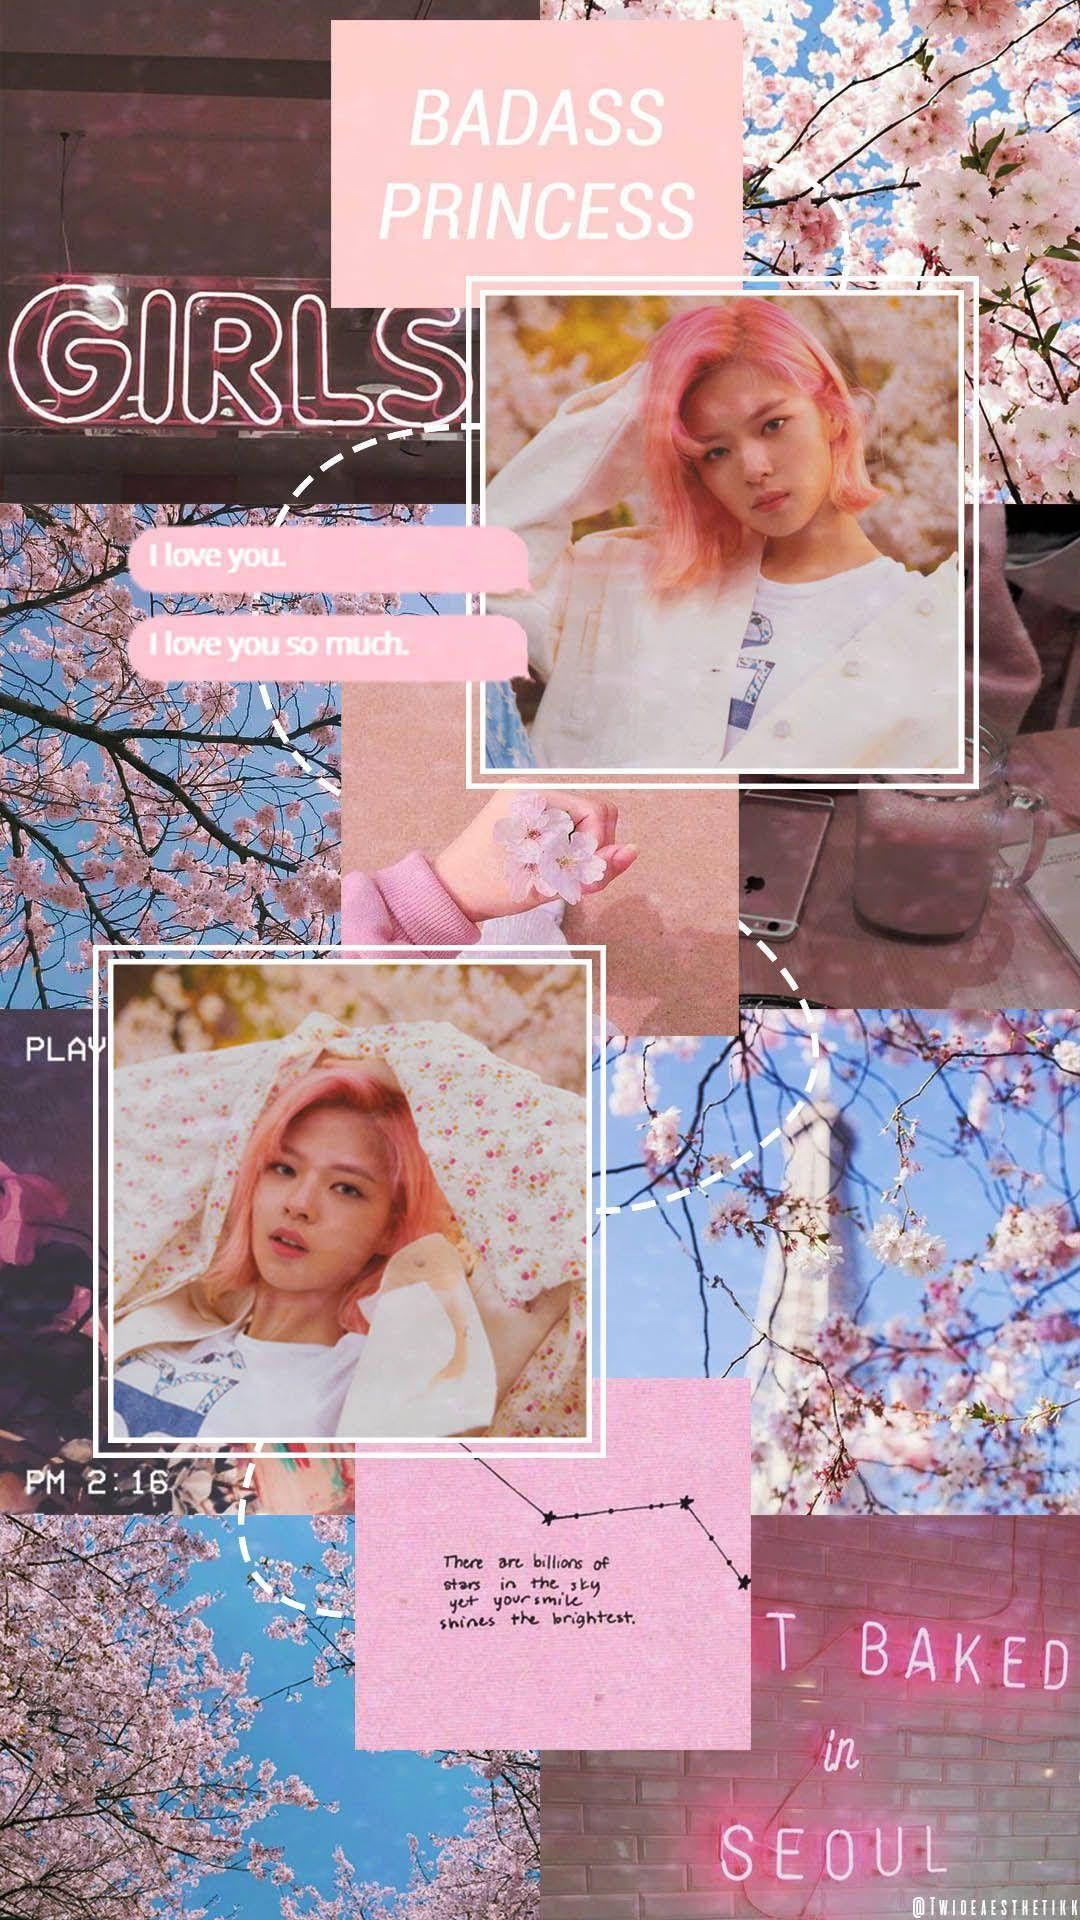 Aesthetic pink phone background with images of TXT, Blackpink, and other K-Pop groups - Princess